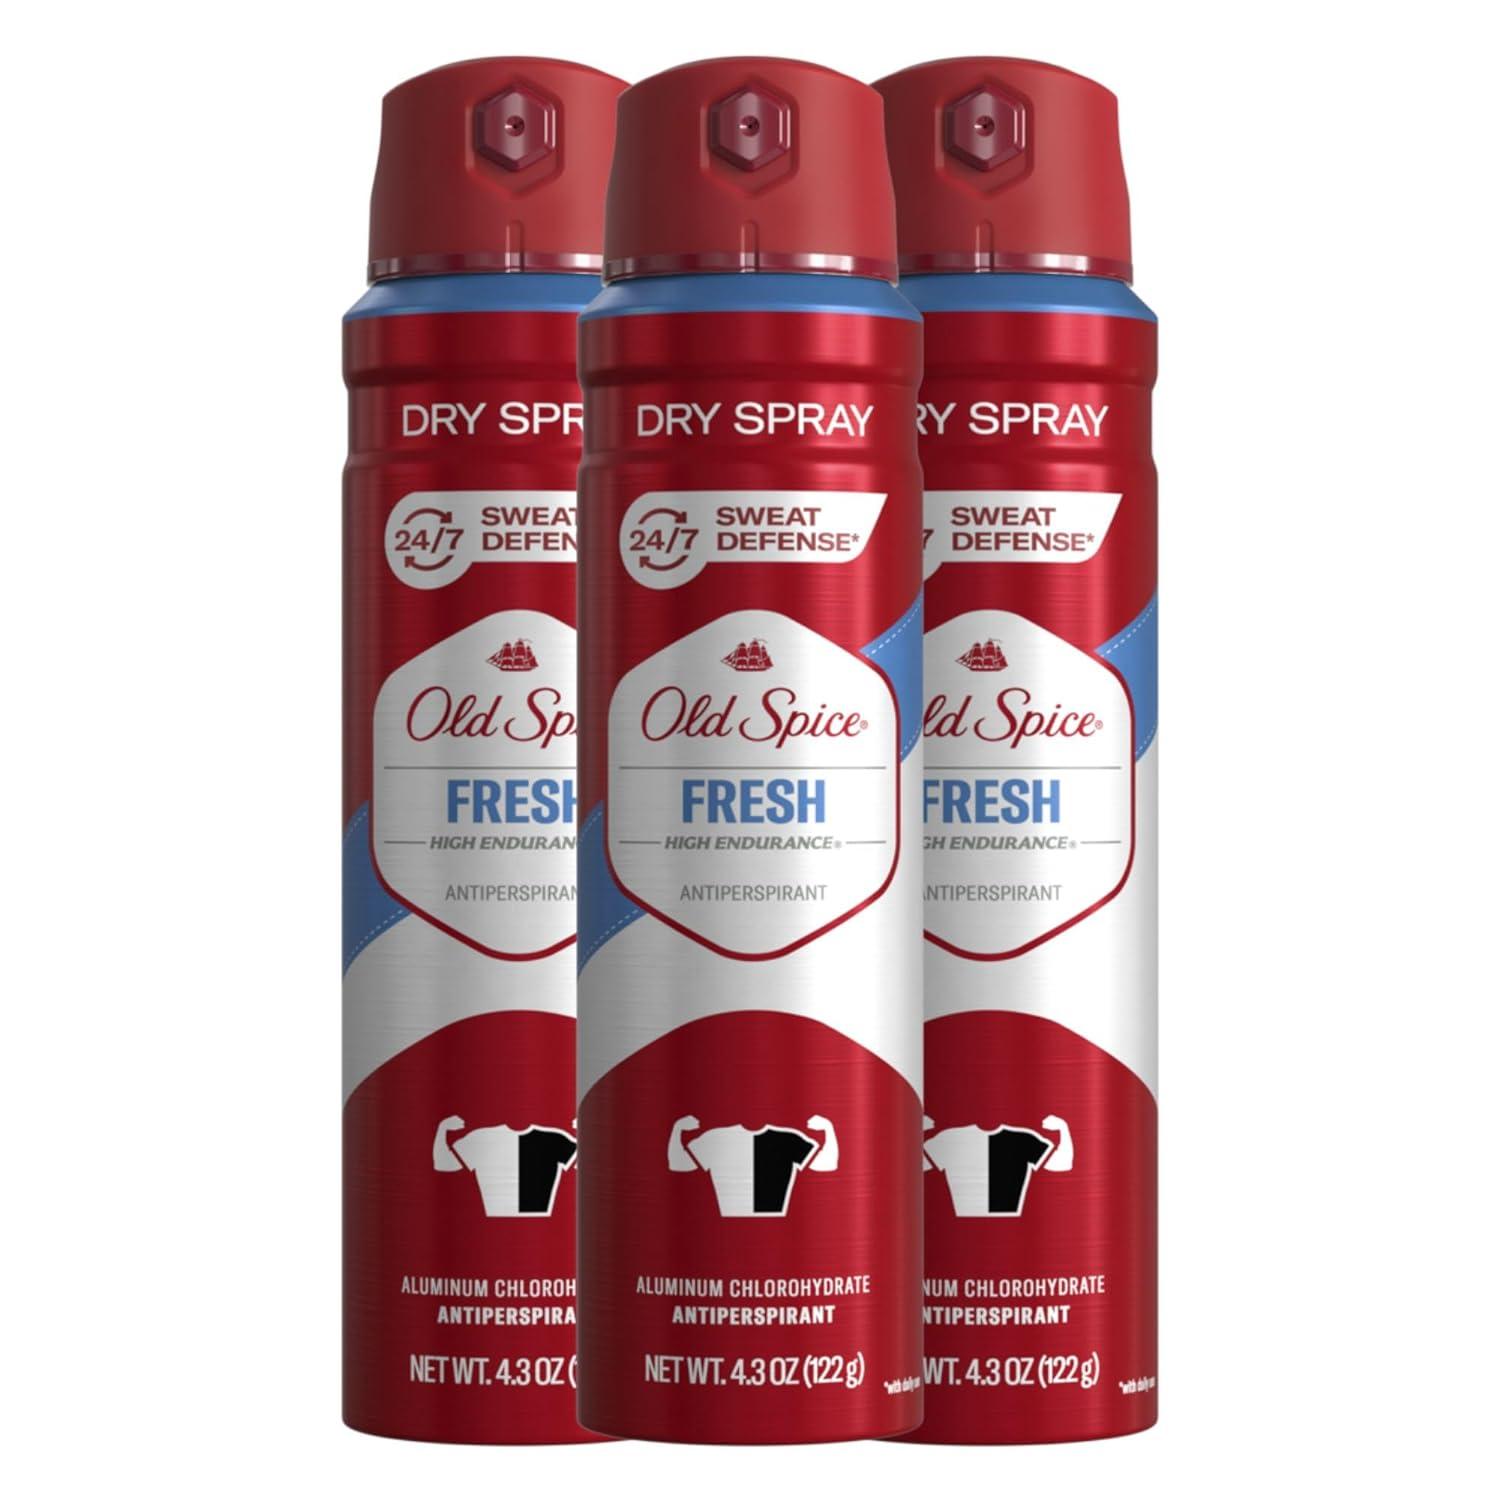 Old Spice High Endurance Anti-Perspirant Deodorant Spray 3 Pack for $11.97